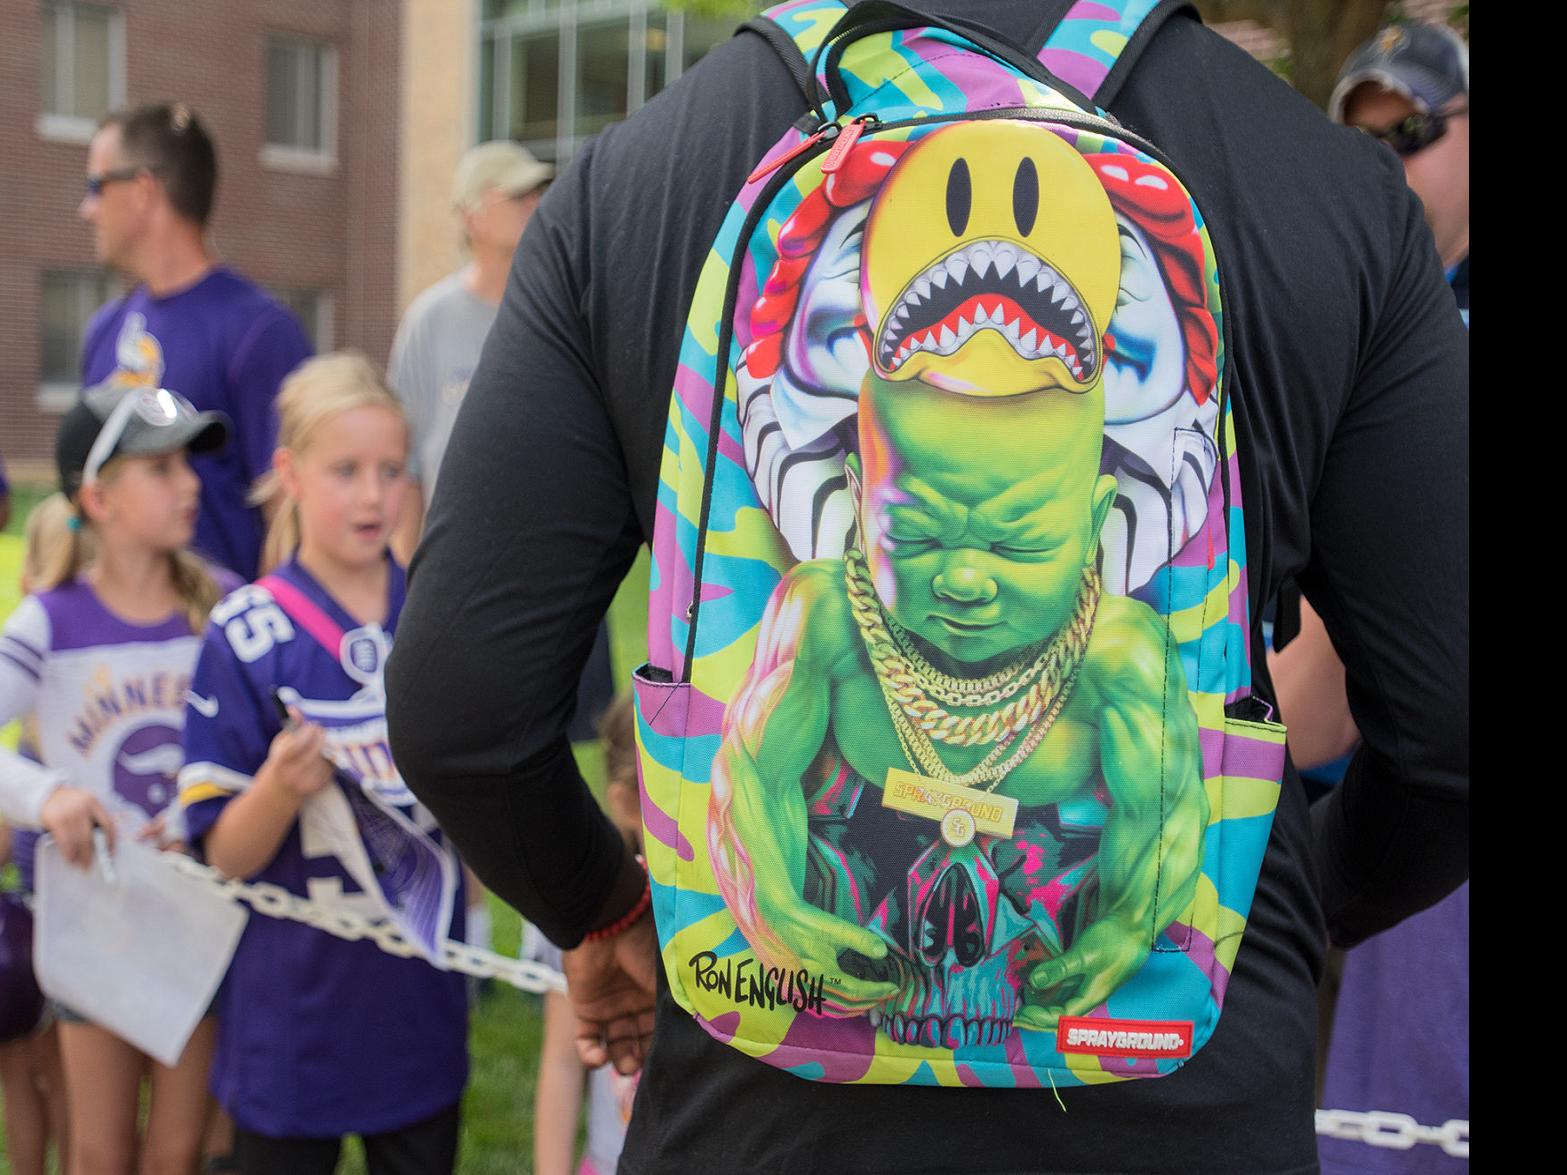 Pro football players spread backpack trends